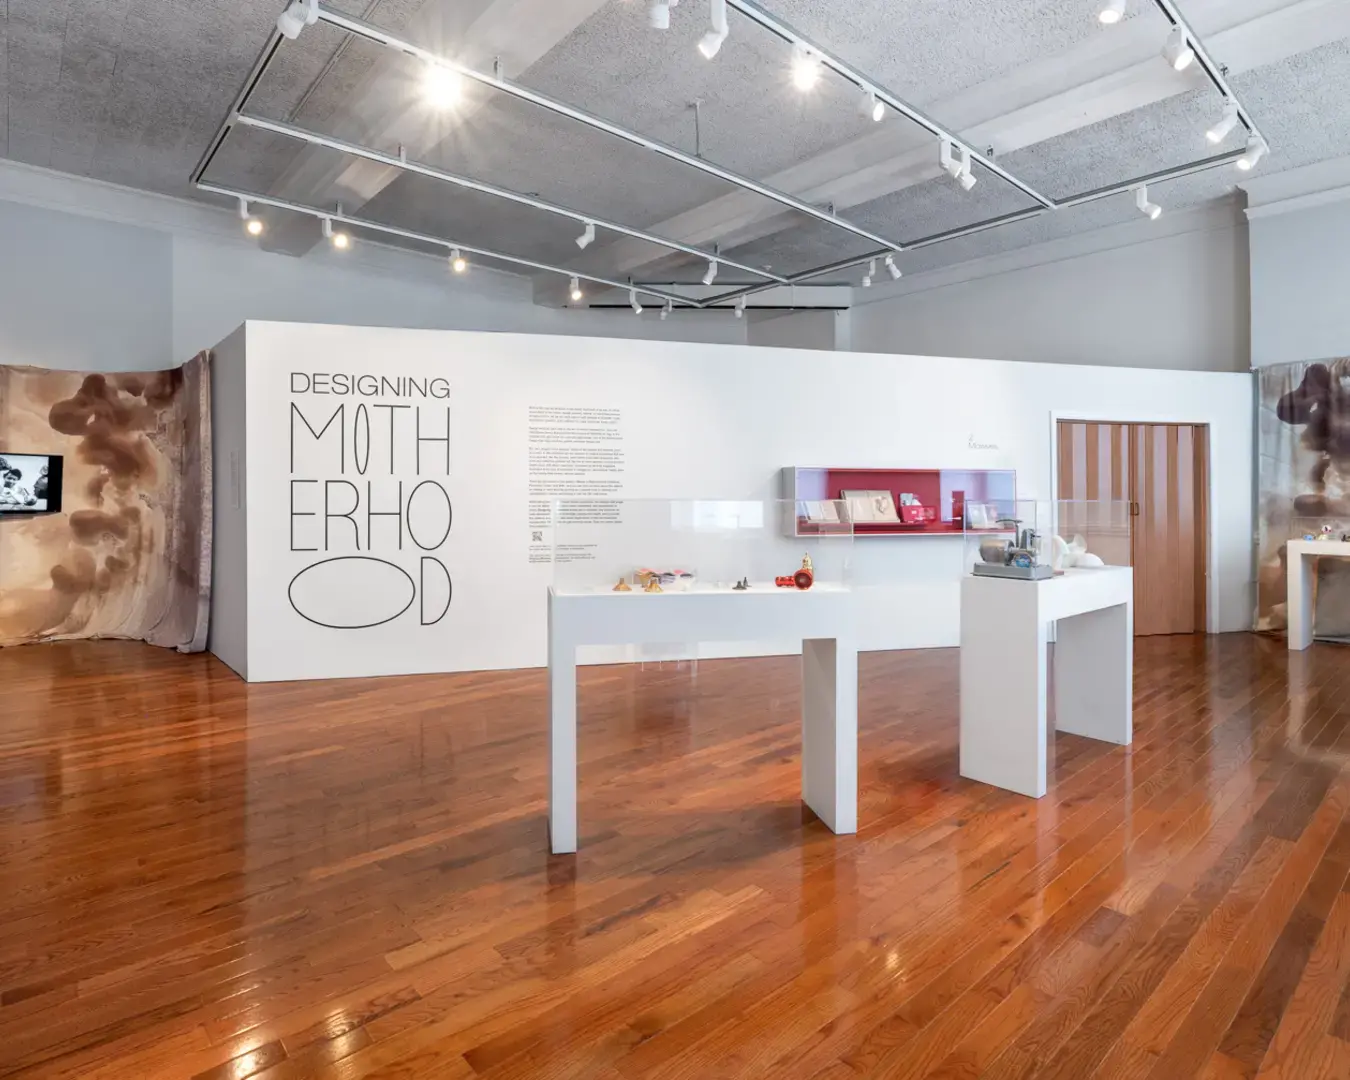 Designing Motherhood: Things That Make and Break Our Births, 2021, installation view, The Mütter Museum of The College of Physicians of Philadelphia, Philadelphia, PA. Photo by Constance Mensh, image courtesy of the Mütter Museum.